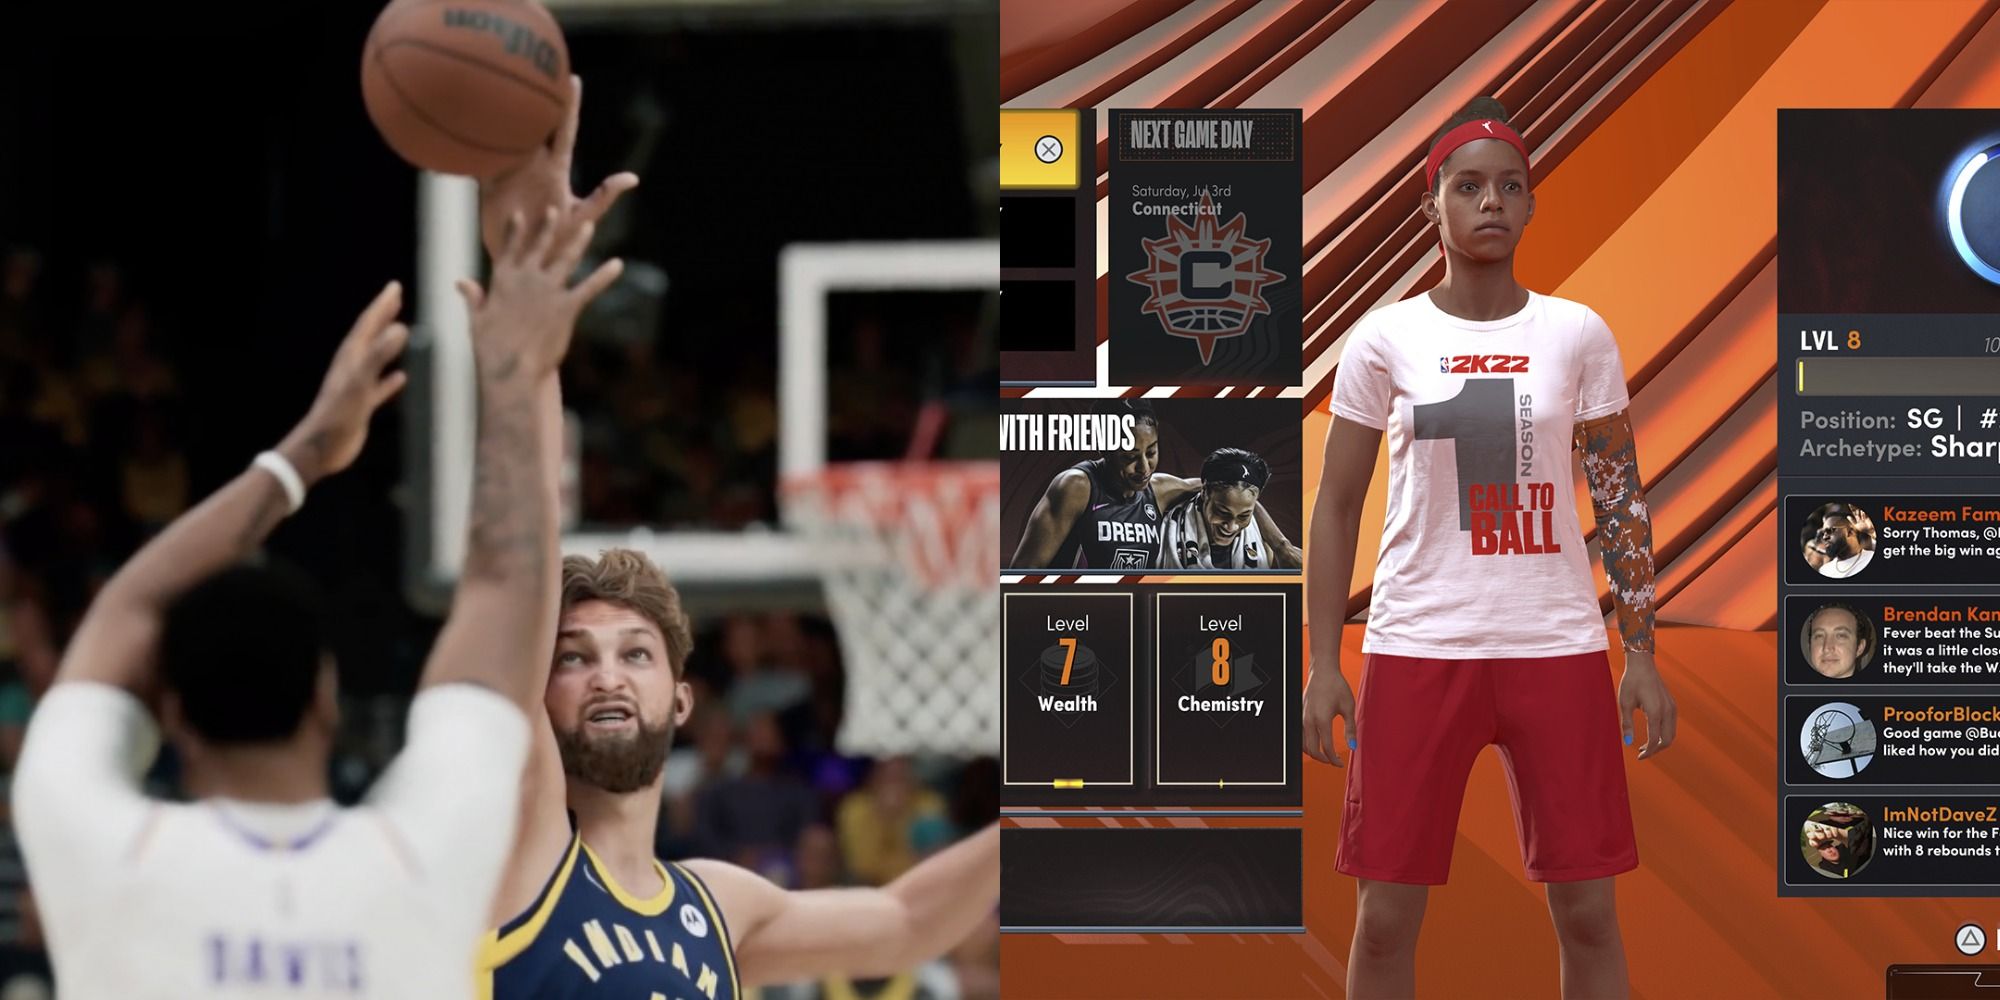 Split image of a shot getting blocked and a woman being created in NBA 2K22